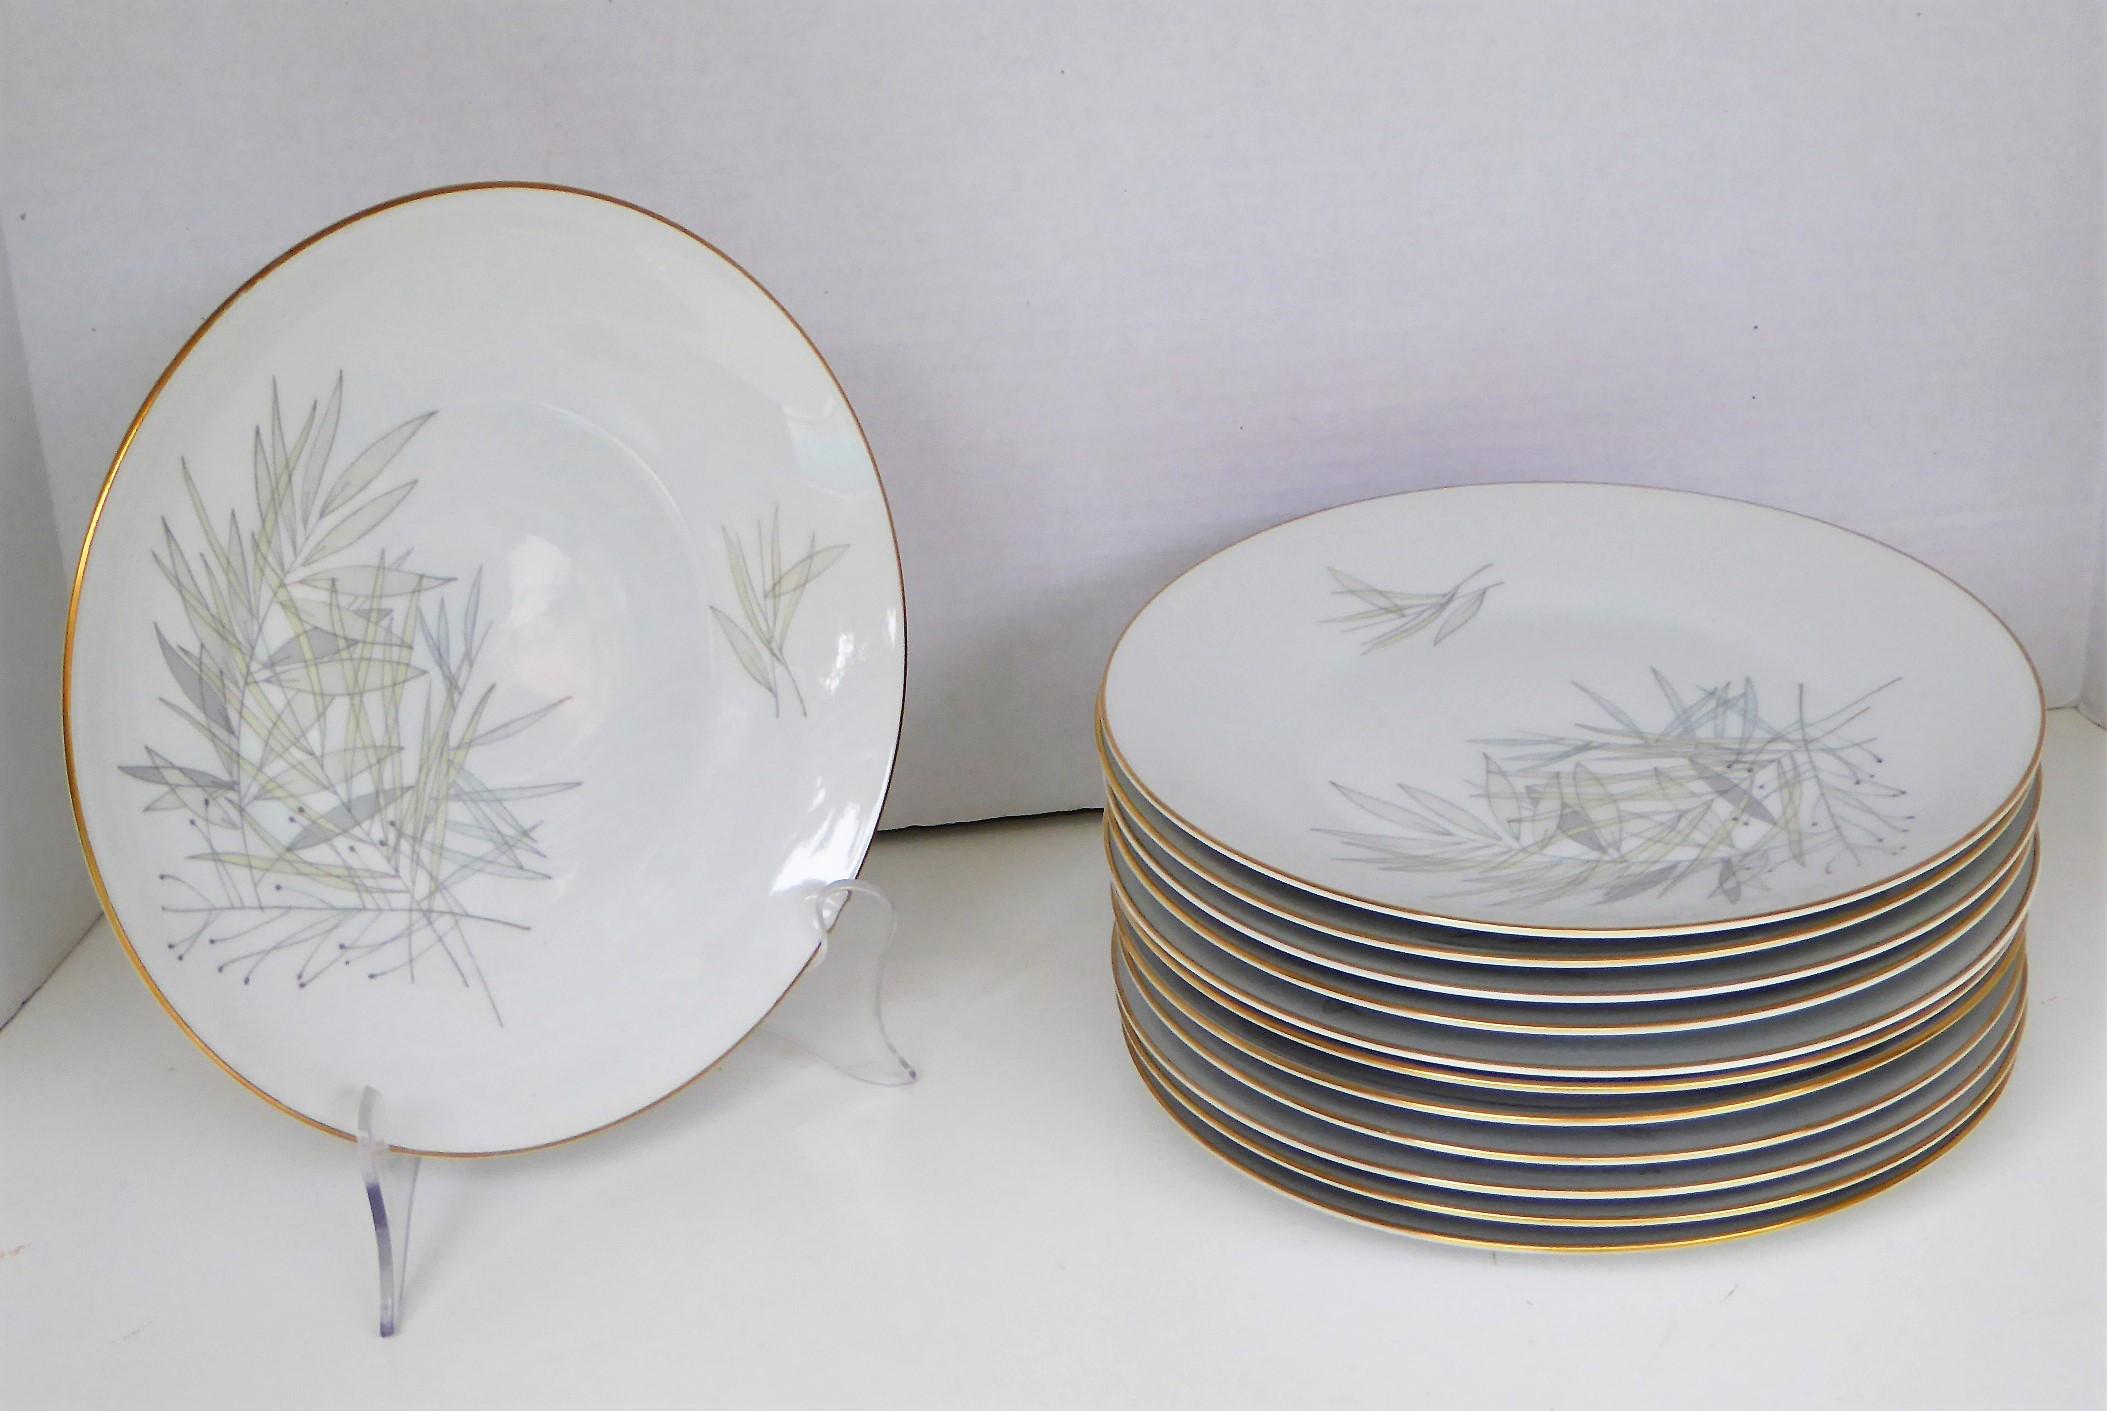 Raymond Loewy for Rosenthal, Germany Mid Century Modern  set of 12 porcelain Dinner plates  The form is the iconic 2000 Pattern: Grasses 3687. introduced in 1958.  An elegant reminder of the pleasures of mid-century modern design, this sleek dinner